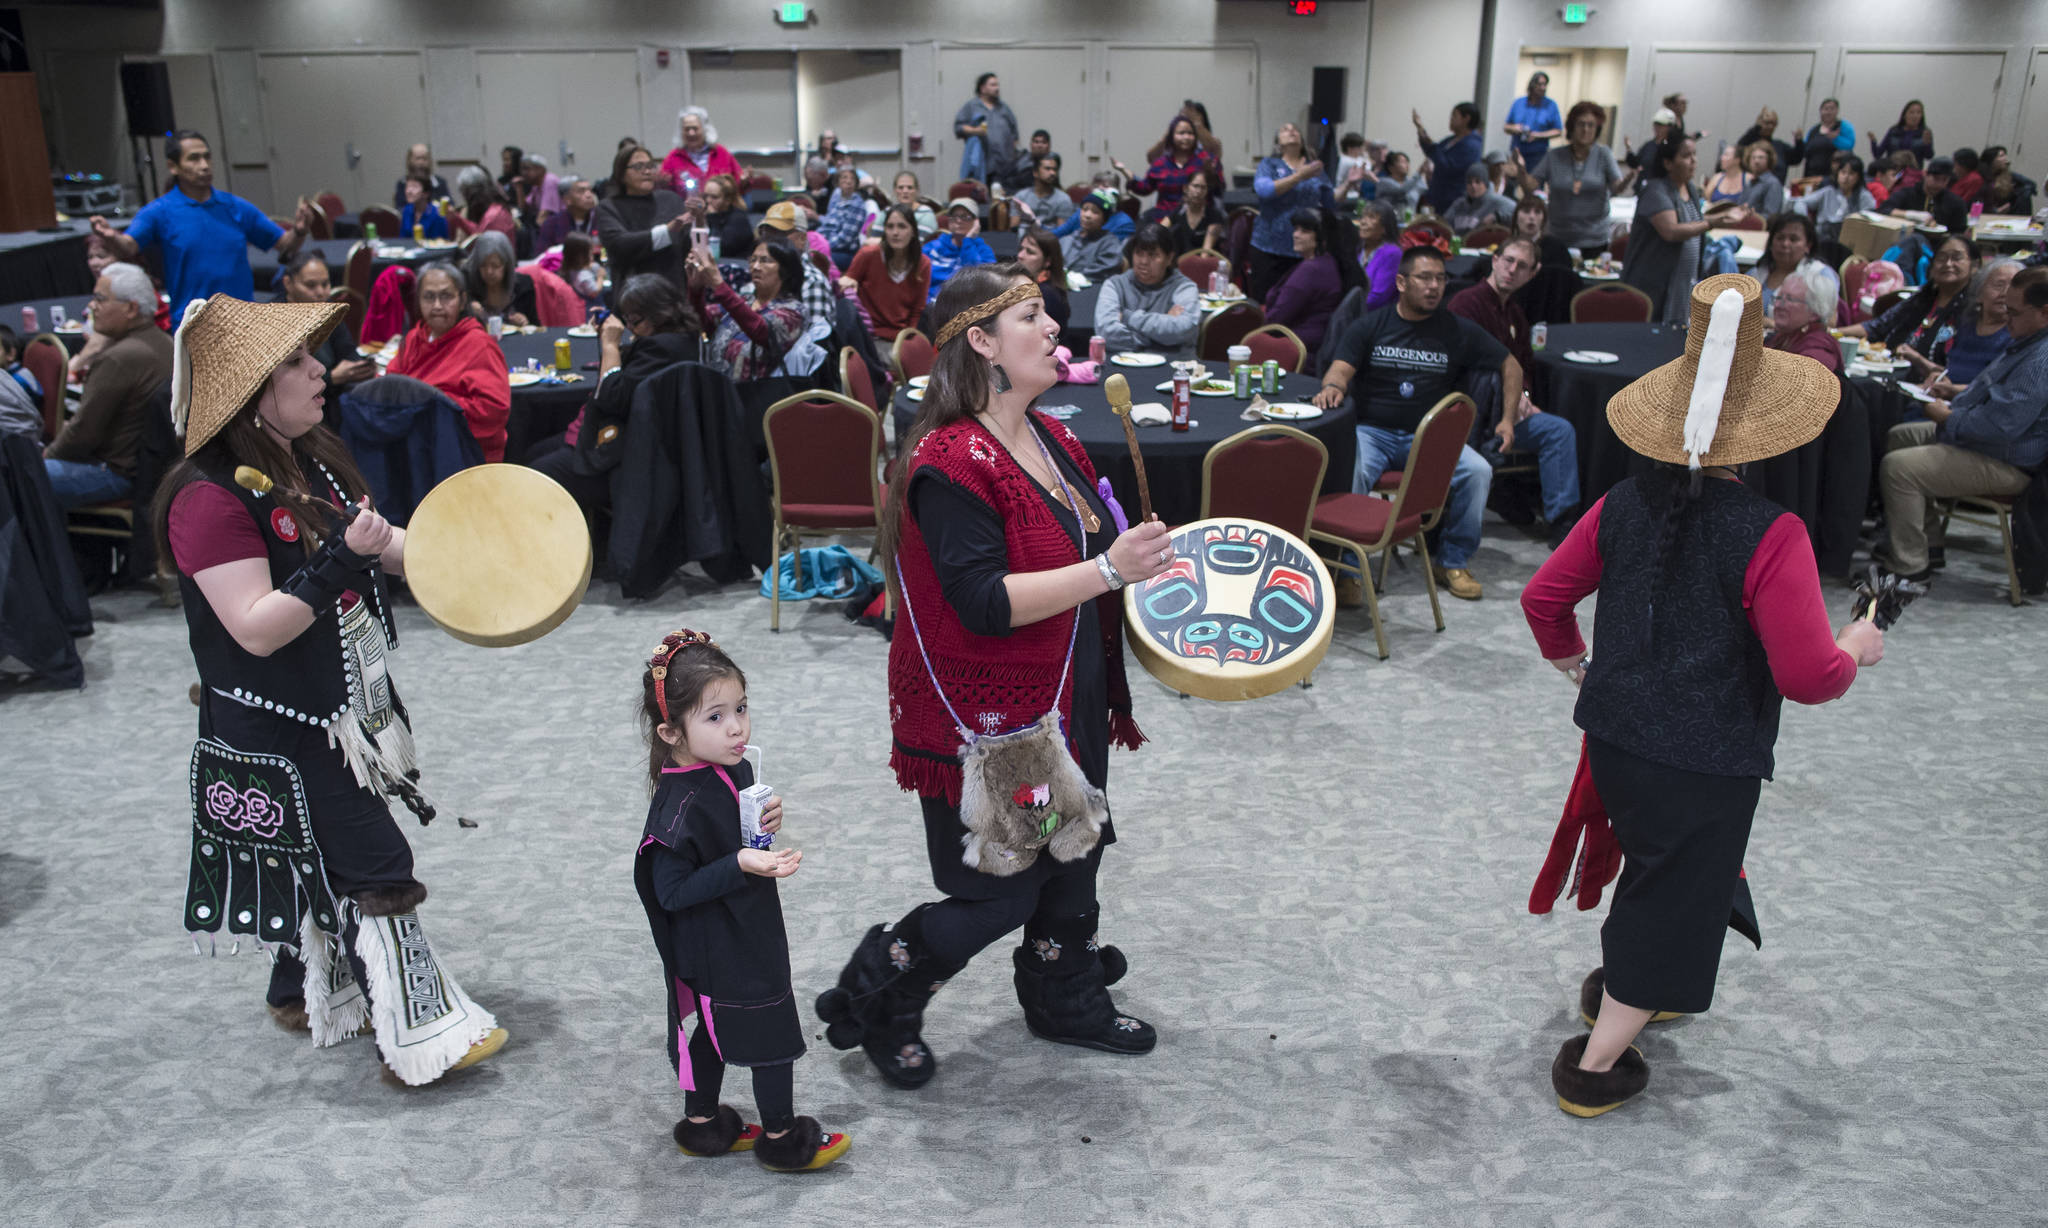 Members of the Woosh.ji.een Dance Group perform during a Celebrate Survivors gathering sponsored by Central Council Tlingit and Haida Indian Tribes of Alaska and AWARE in the Elizabeth Peratrovich Hall on Tuesday, Oct. 23, 2018. October is Domestic Violence Awareness Month. (Michael Penn | Juneau Empire)